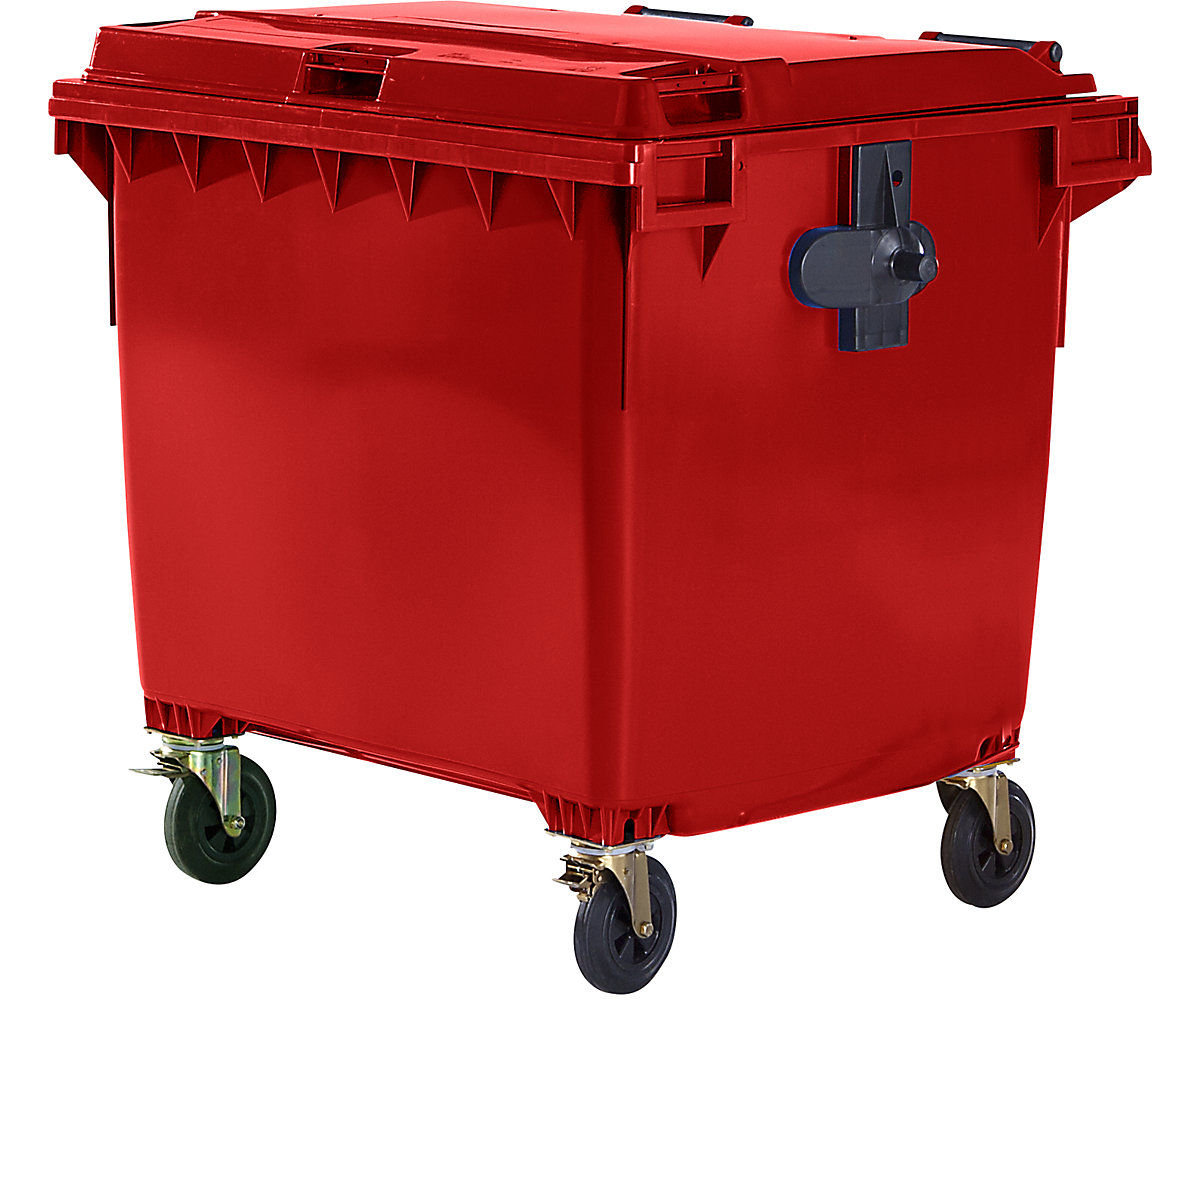 Plastic waste container, DIN EN 840, capacity 1100 l, WxHxD 1370 x 1470 x 1115 mm, red, from 5+ items-3